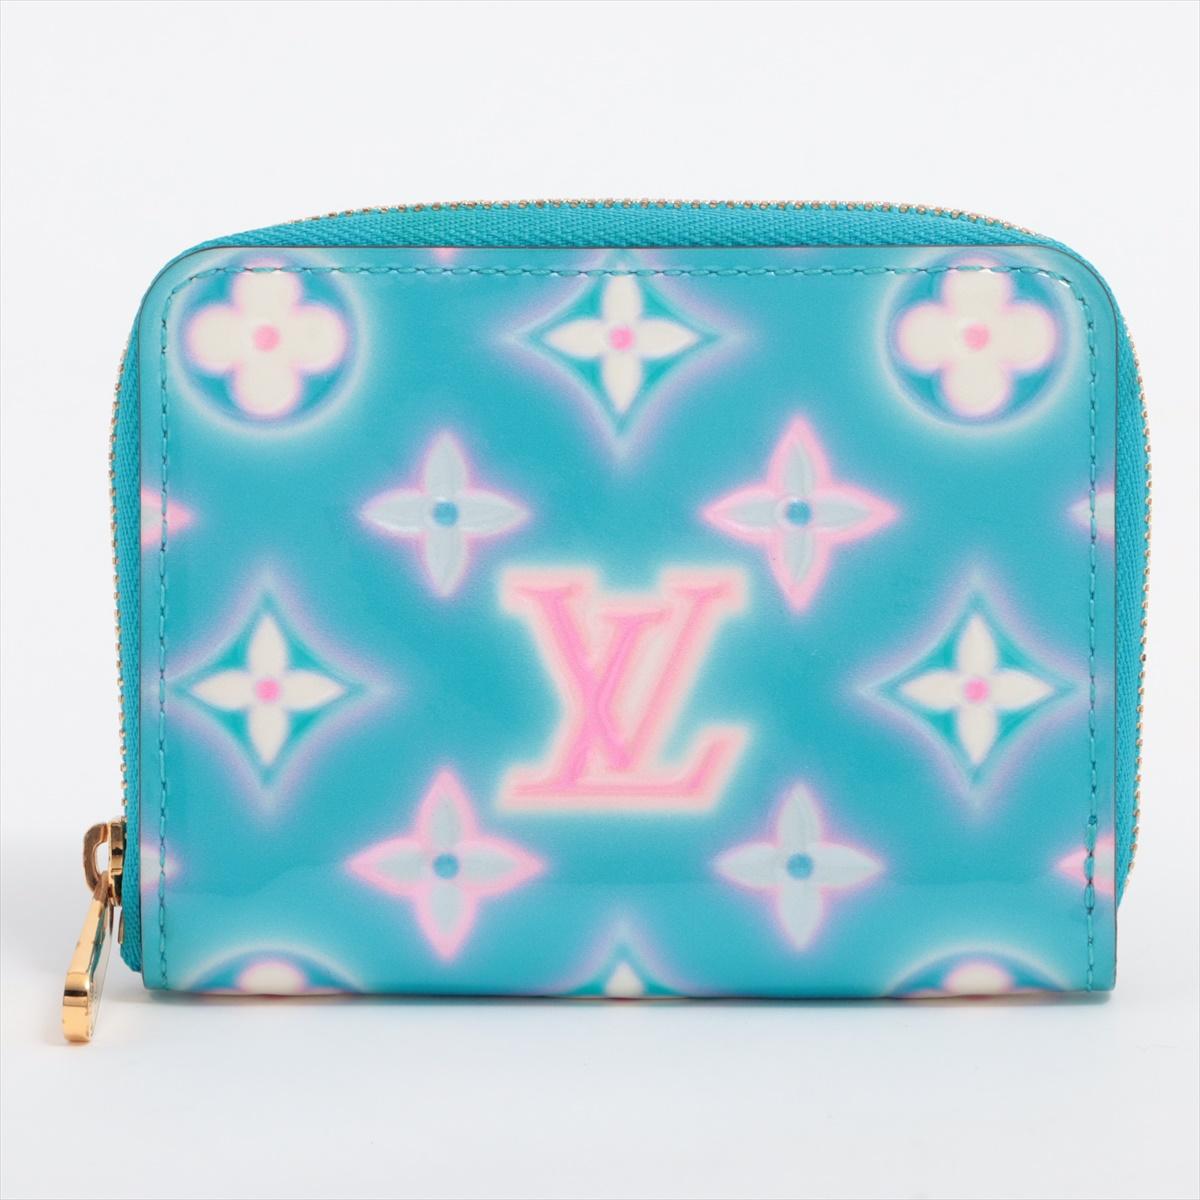 The Louis Vuitton Vernis Zippy Coin Purse in Baby Blue Neon x Pink is a vibrant and playful accessory that adds a pop of color to any ensemble. Crafted from Vernis patent leather, the coin purse boasts a glossy finish that catches the eye. The